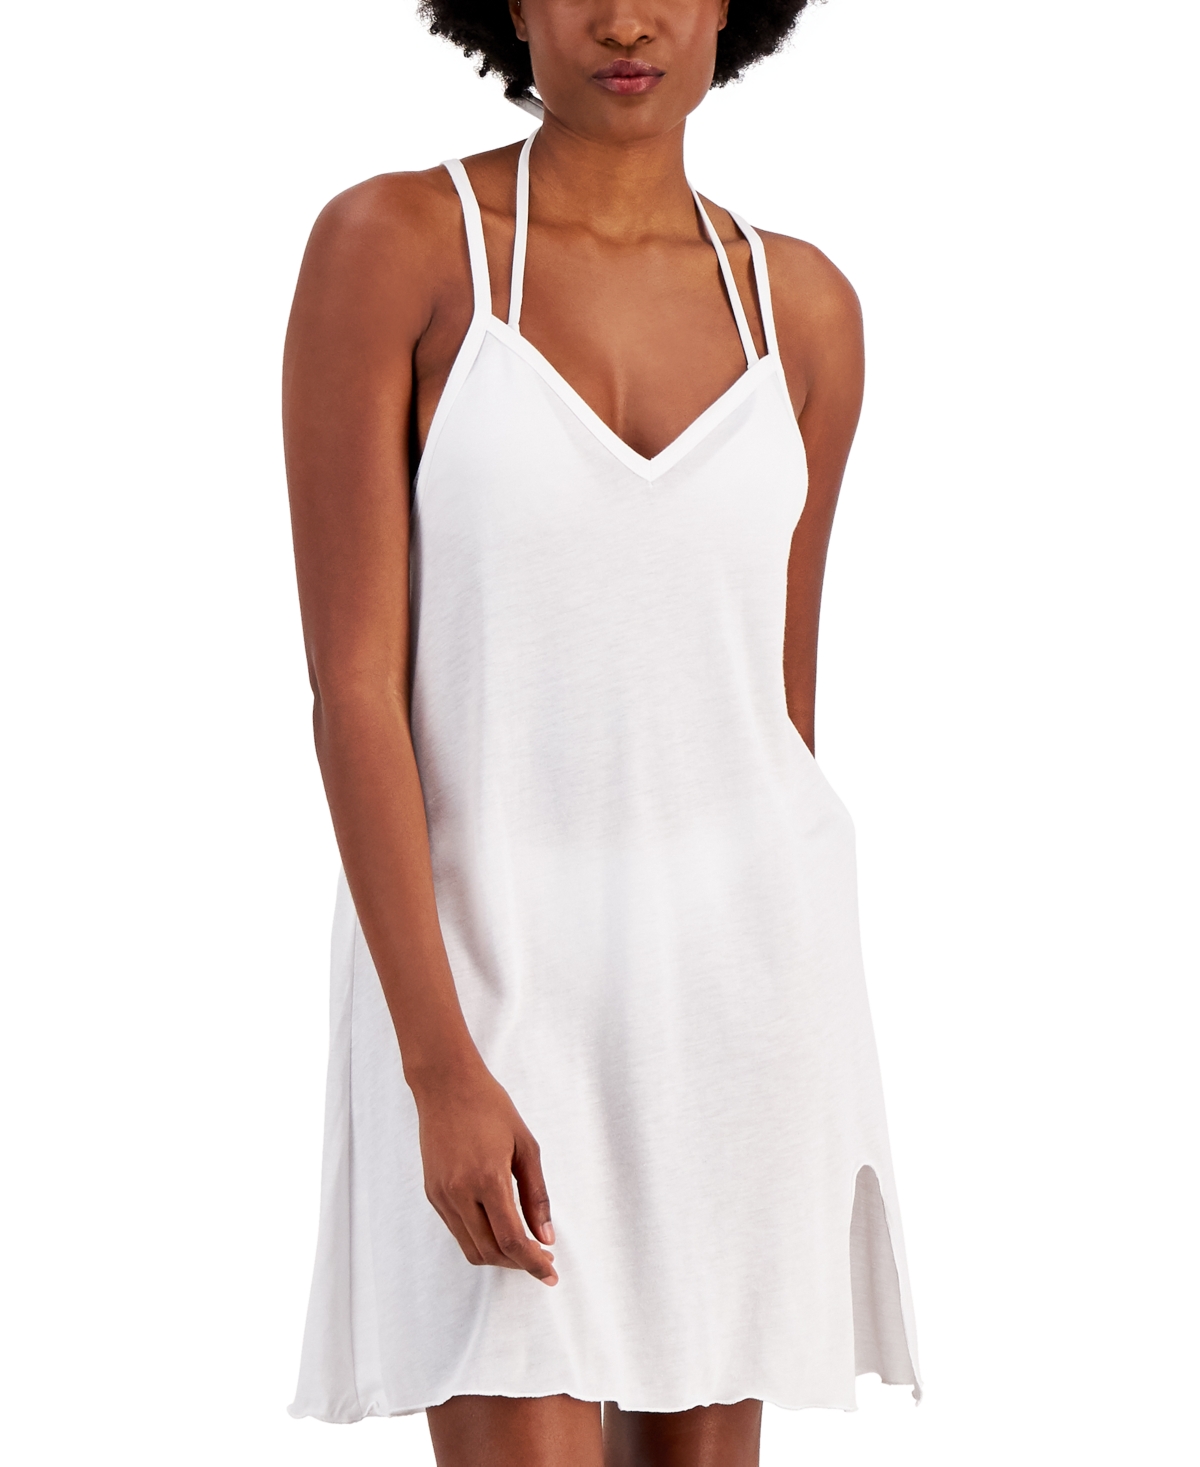 MIKEN JUNIORS' KNOT-HEM COVER-UP DRESS, CREATED FOR MACY'S